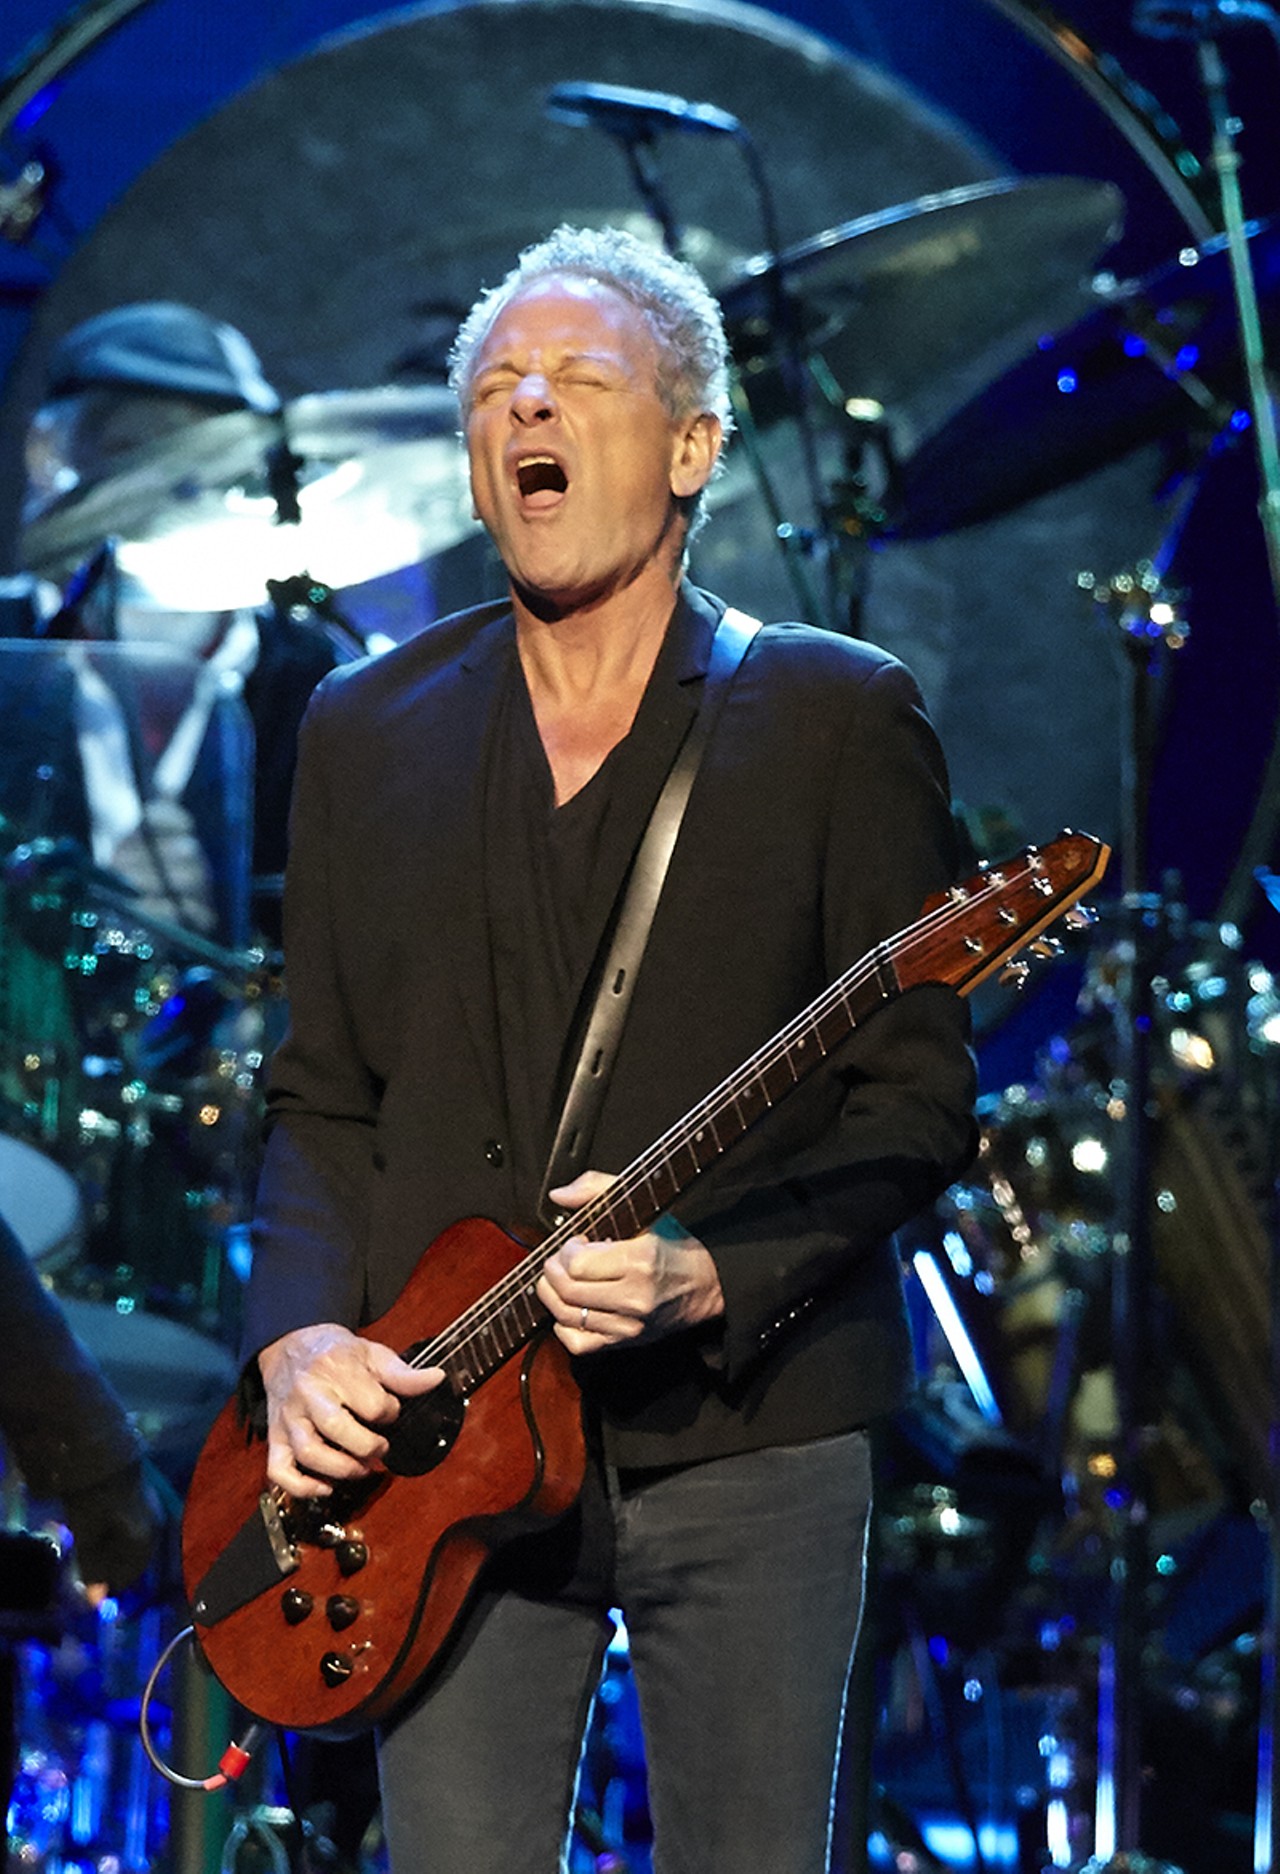 Lindsey Buckingham showing off his guitar face.